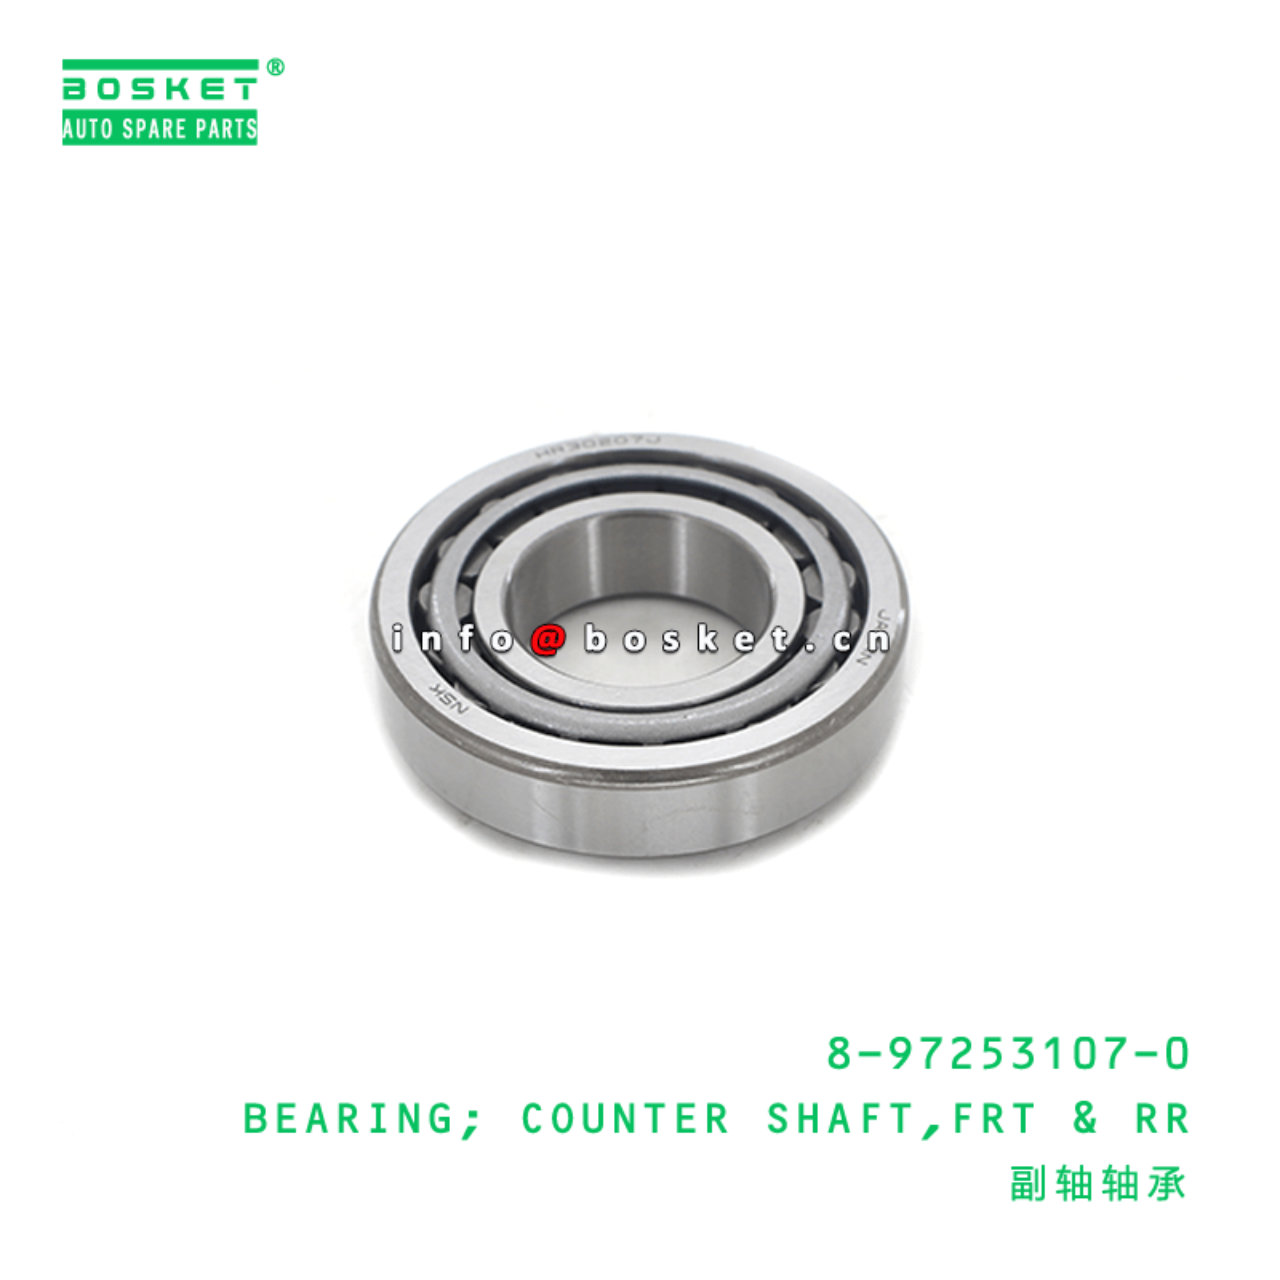 8-97253107-0 Front & Rear Counter Shaft Bearing 8972531070 Suitable for ISUZU NQR71 4HG1 